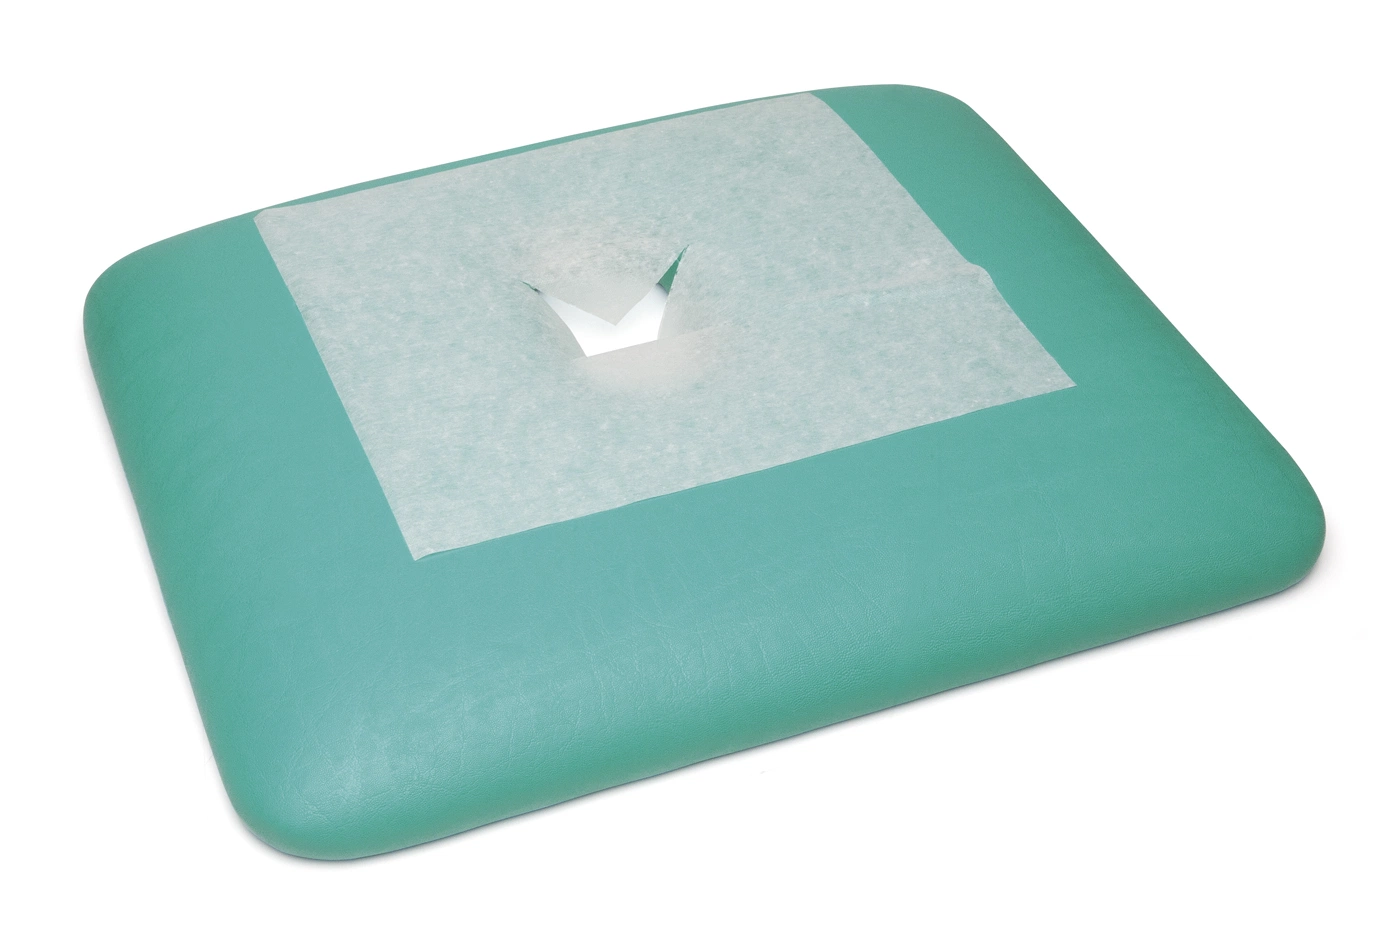 Disposable Face Rest Cover, Massage Chiropractic Headrest Cover